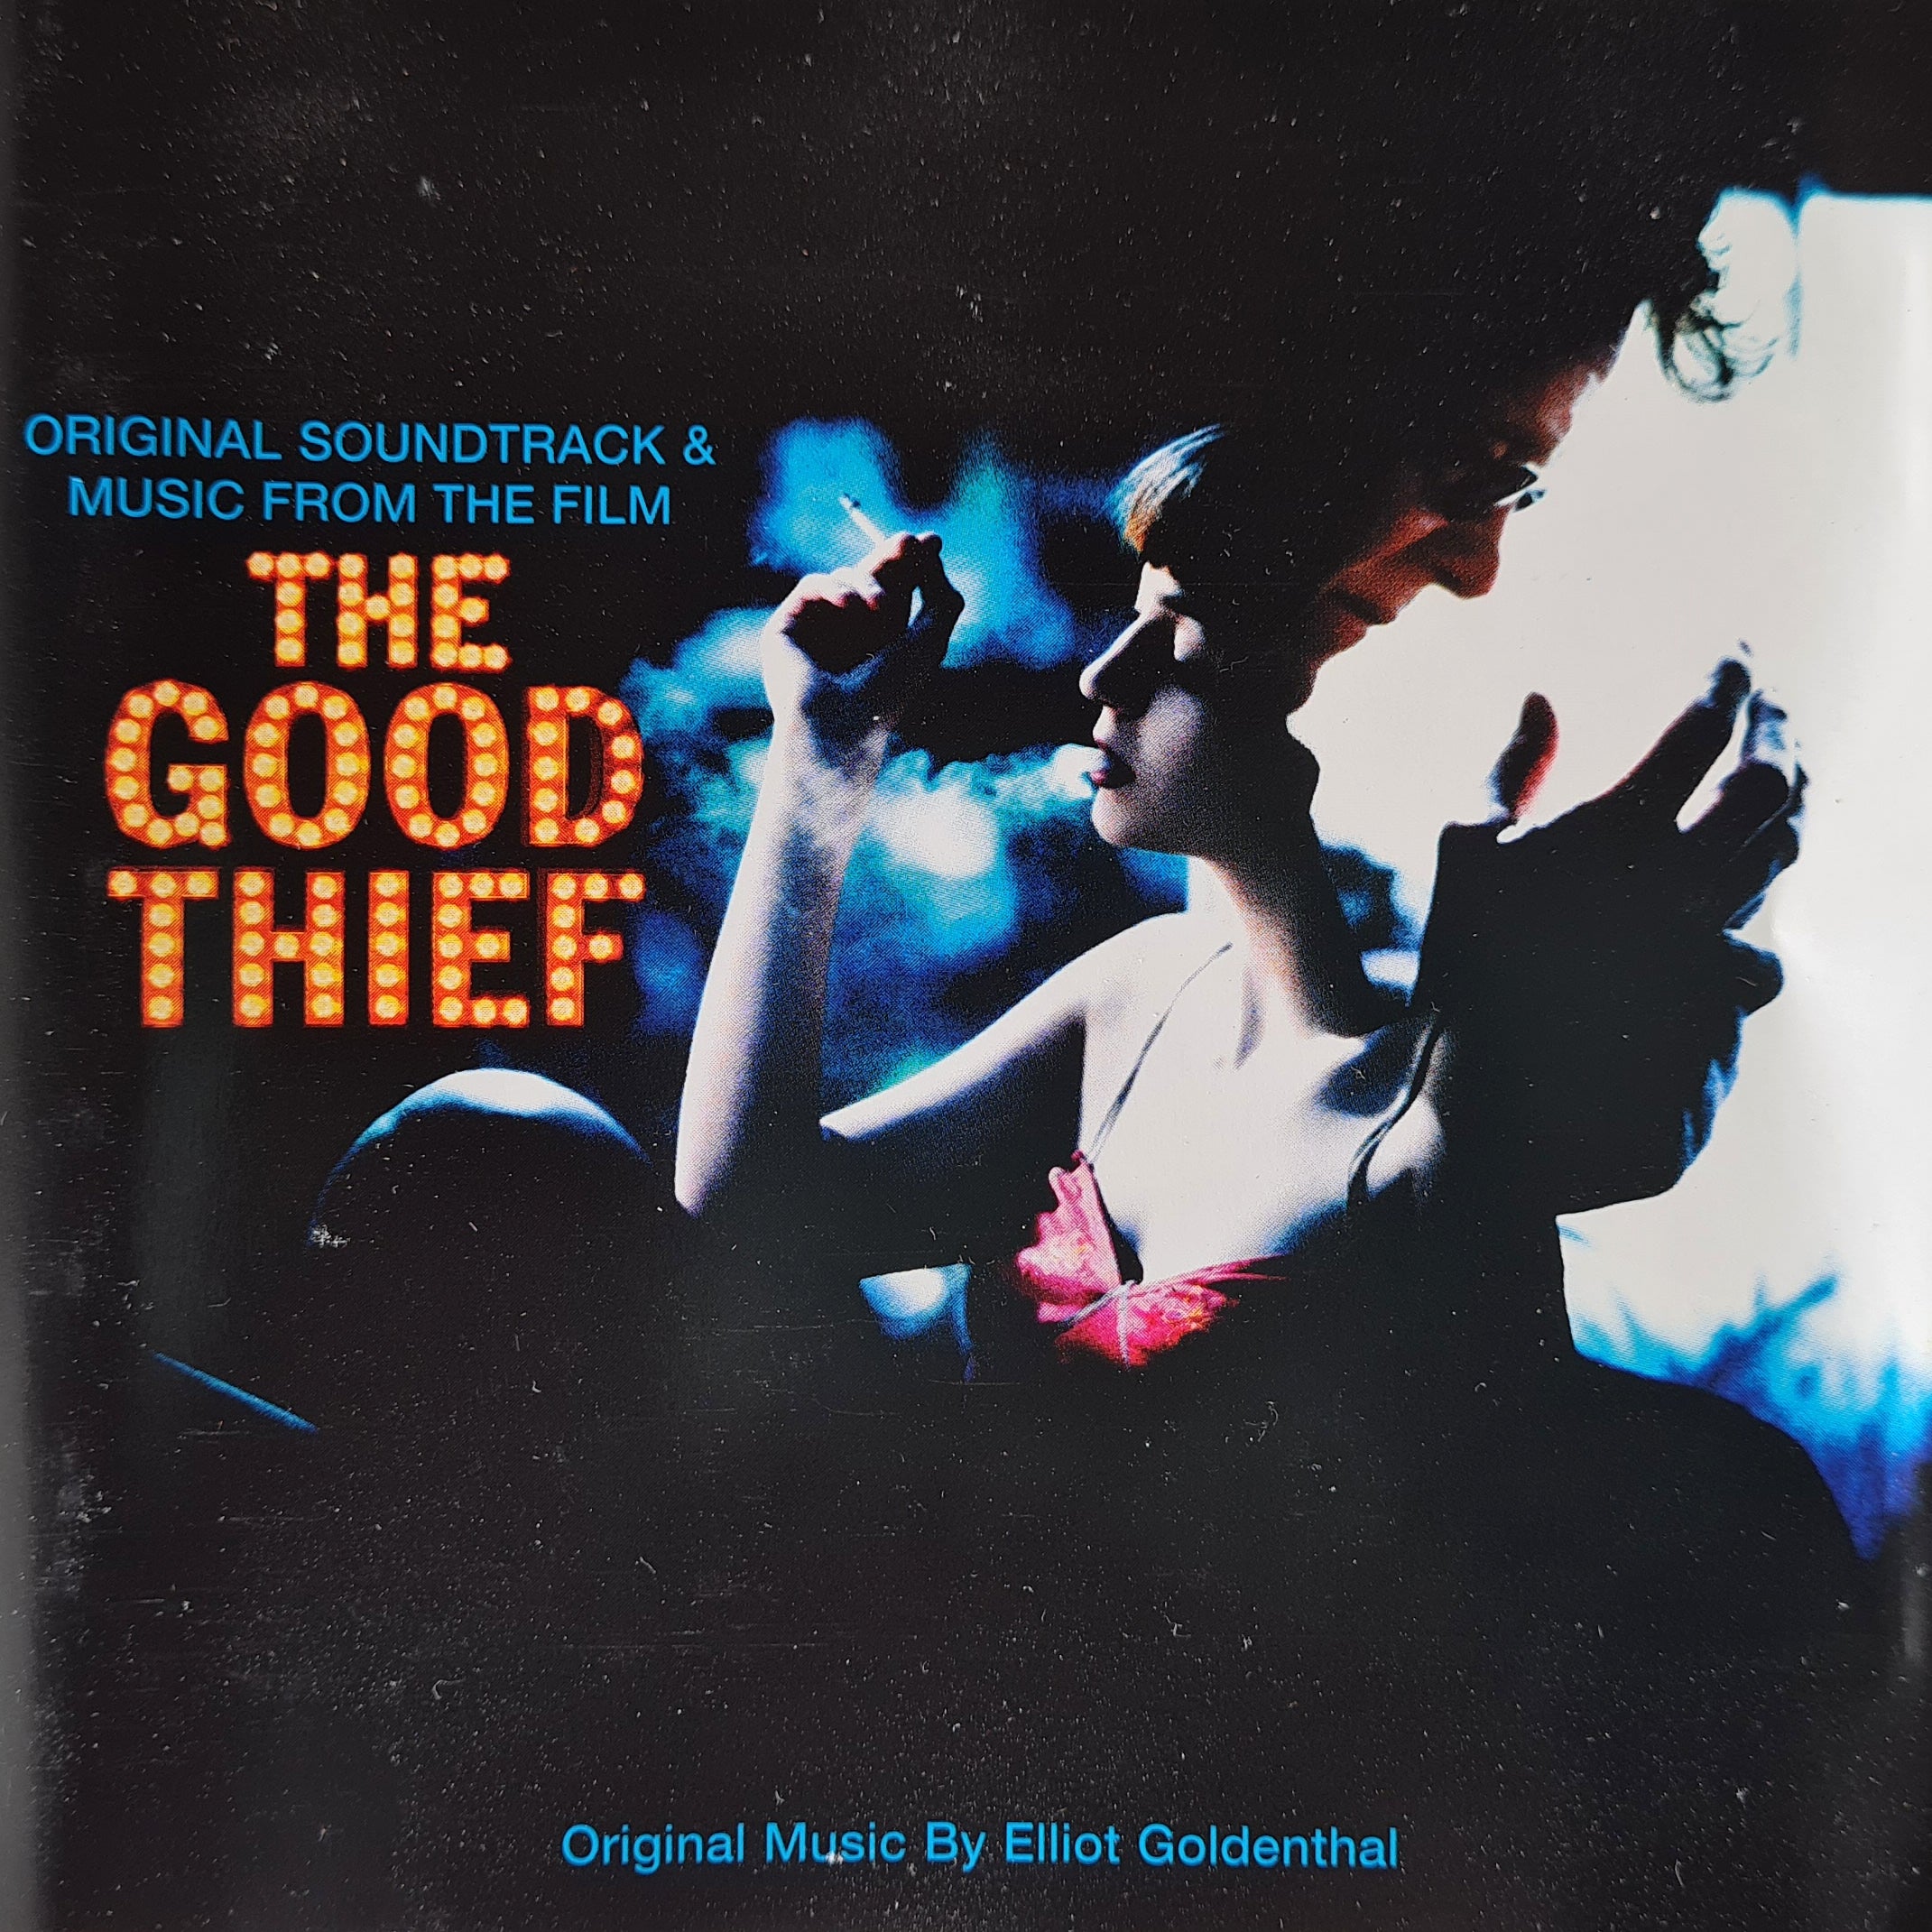 The Good Thief - Original Soundtrack & Music from the Film (CD)